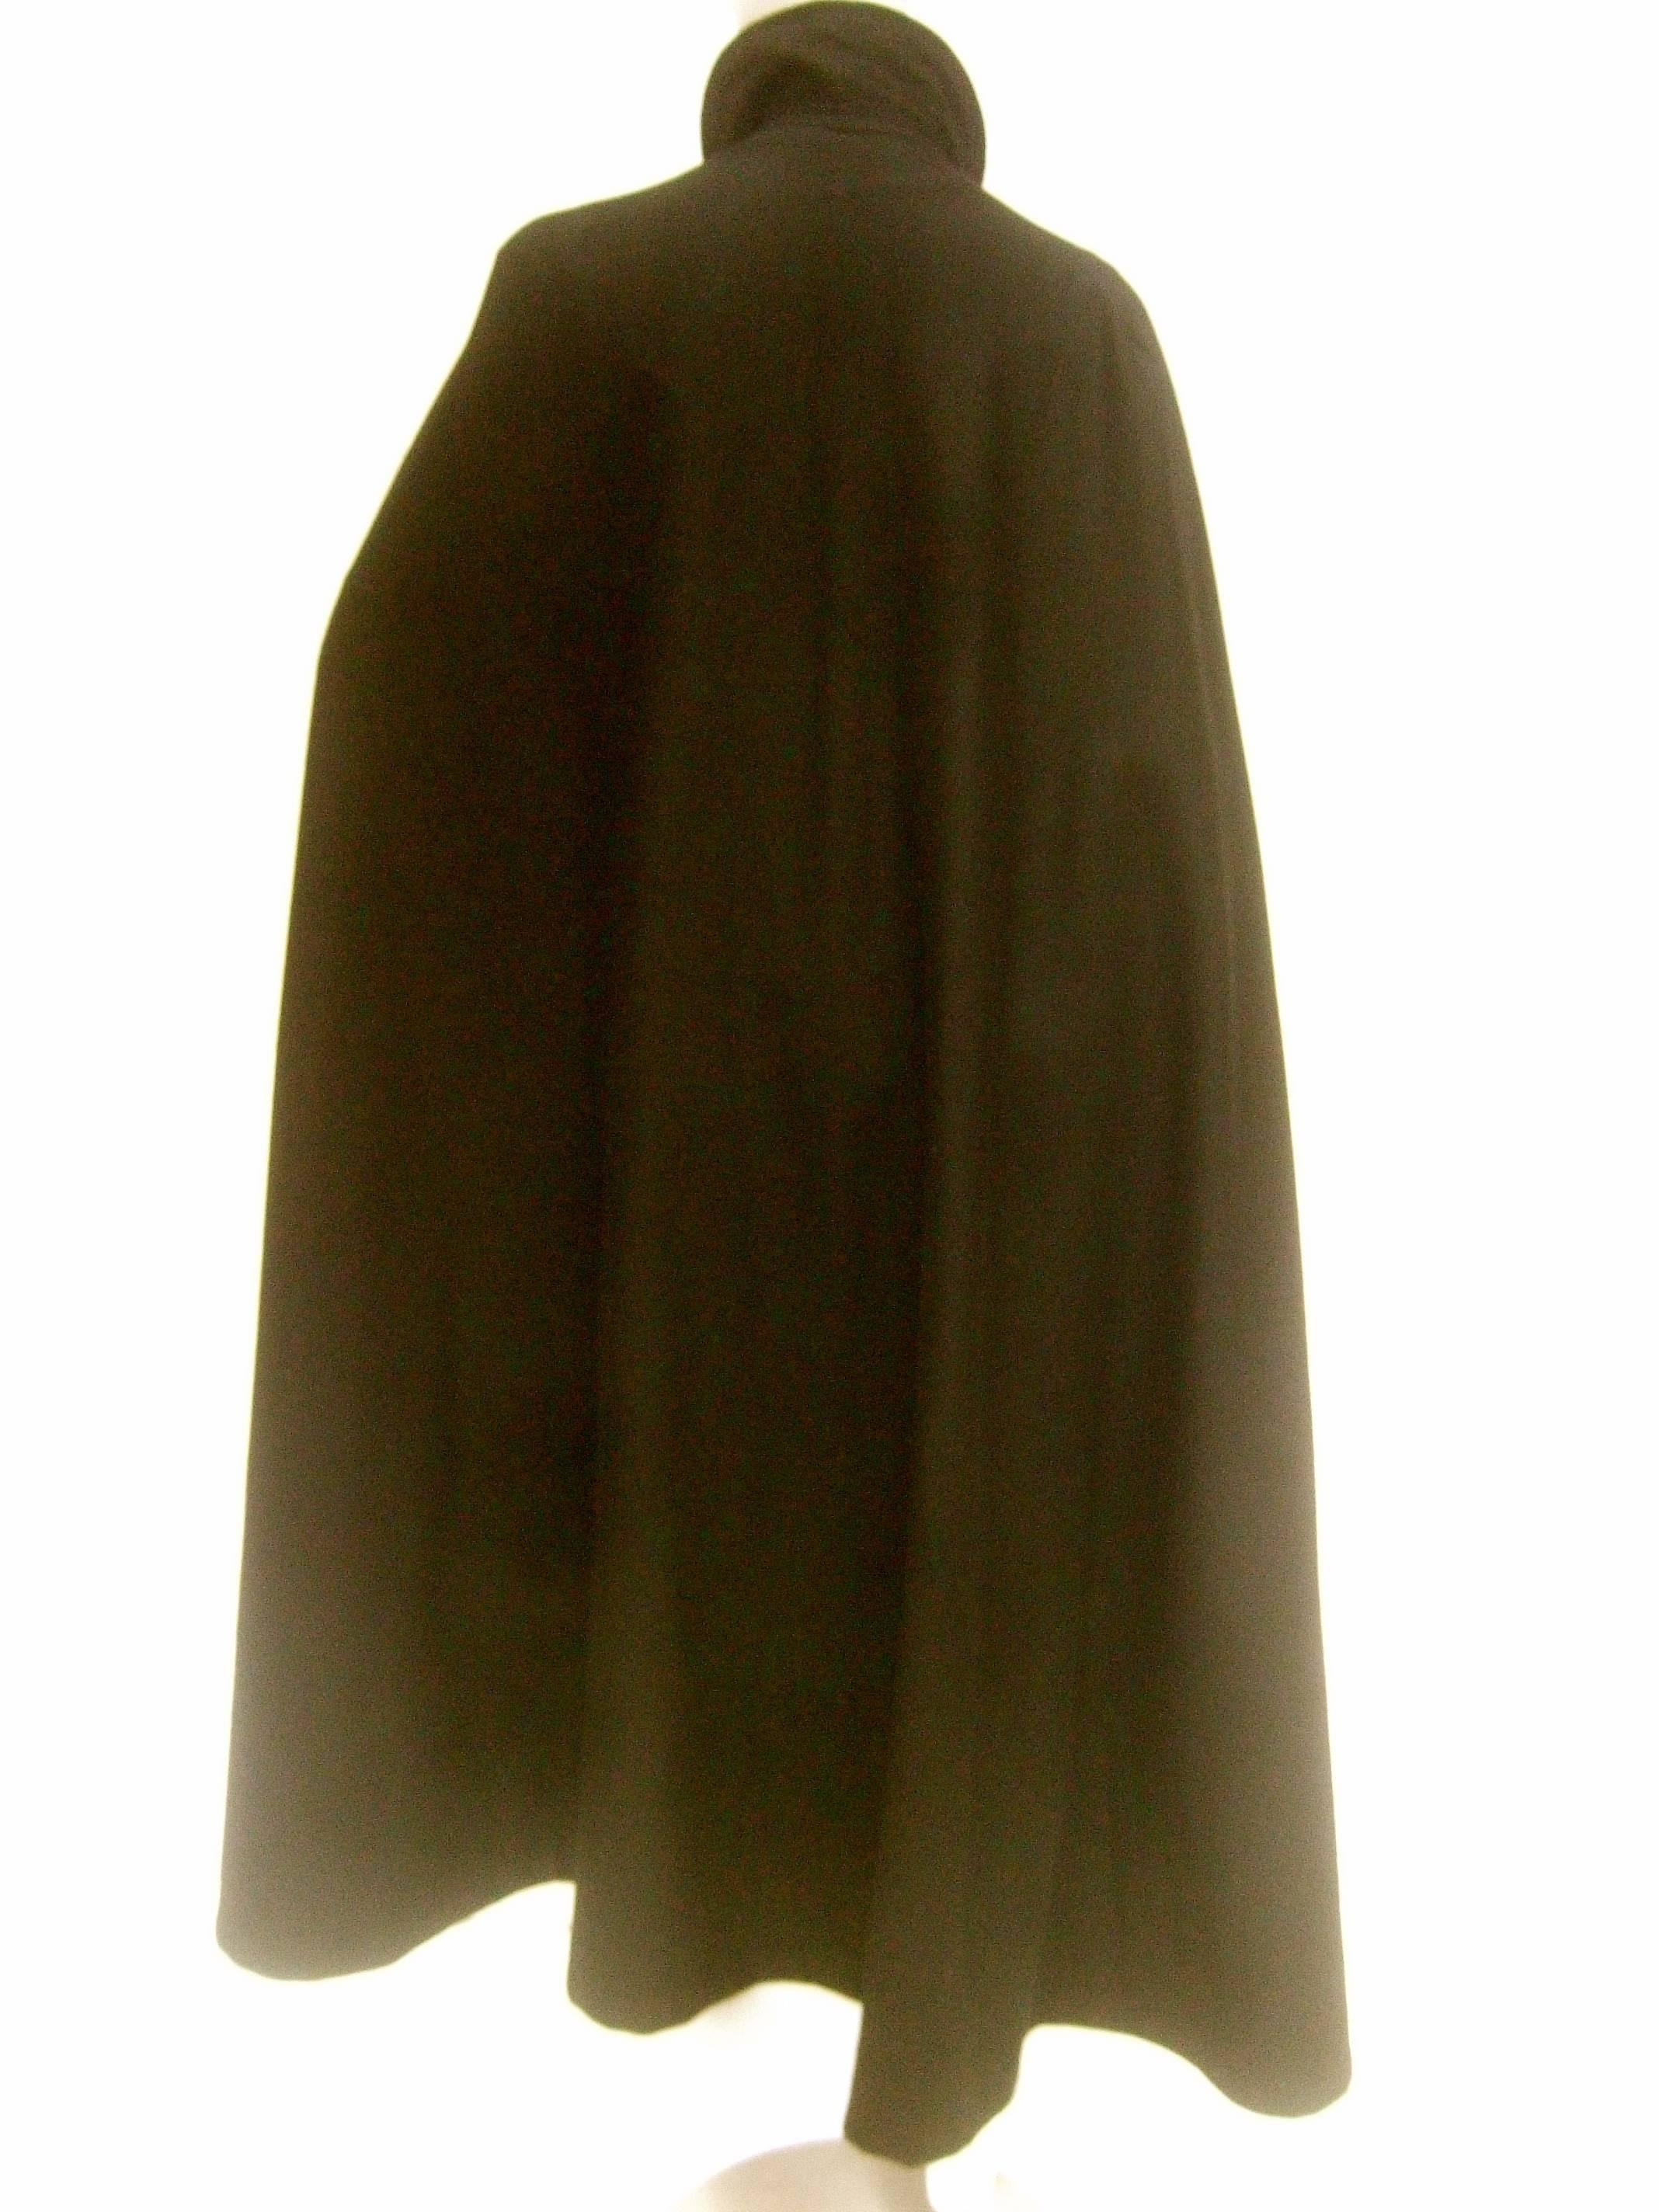 Dramatic Long Black Sweeping Wool Cape Fifth Avenue NY c 1960 6